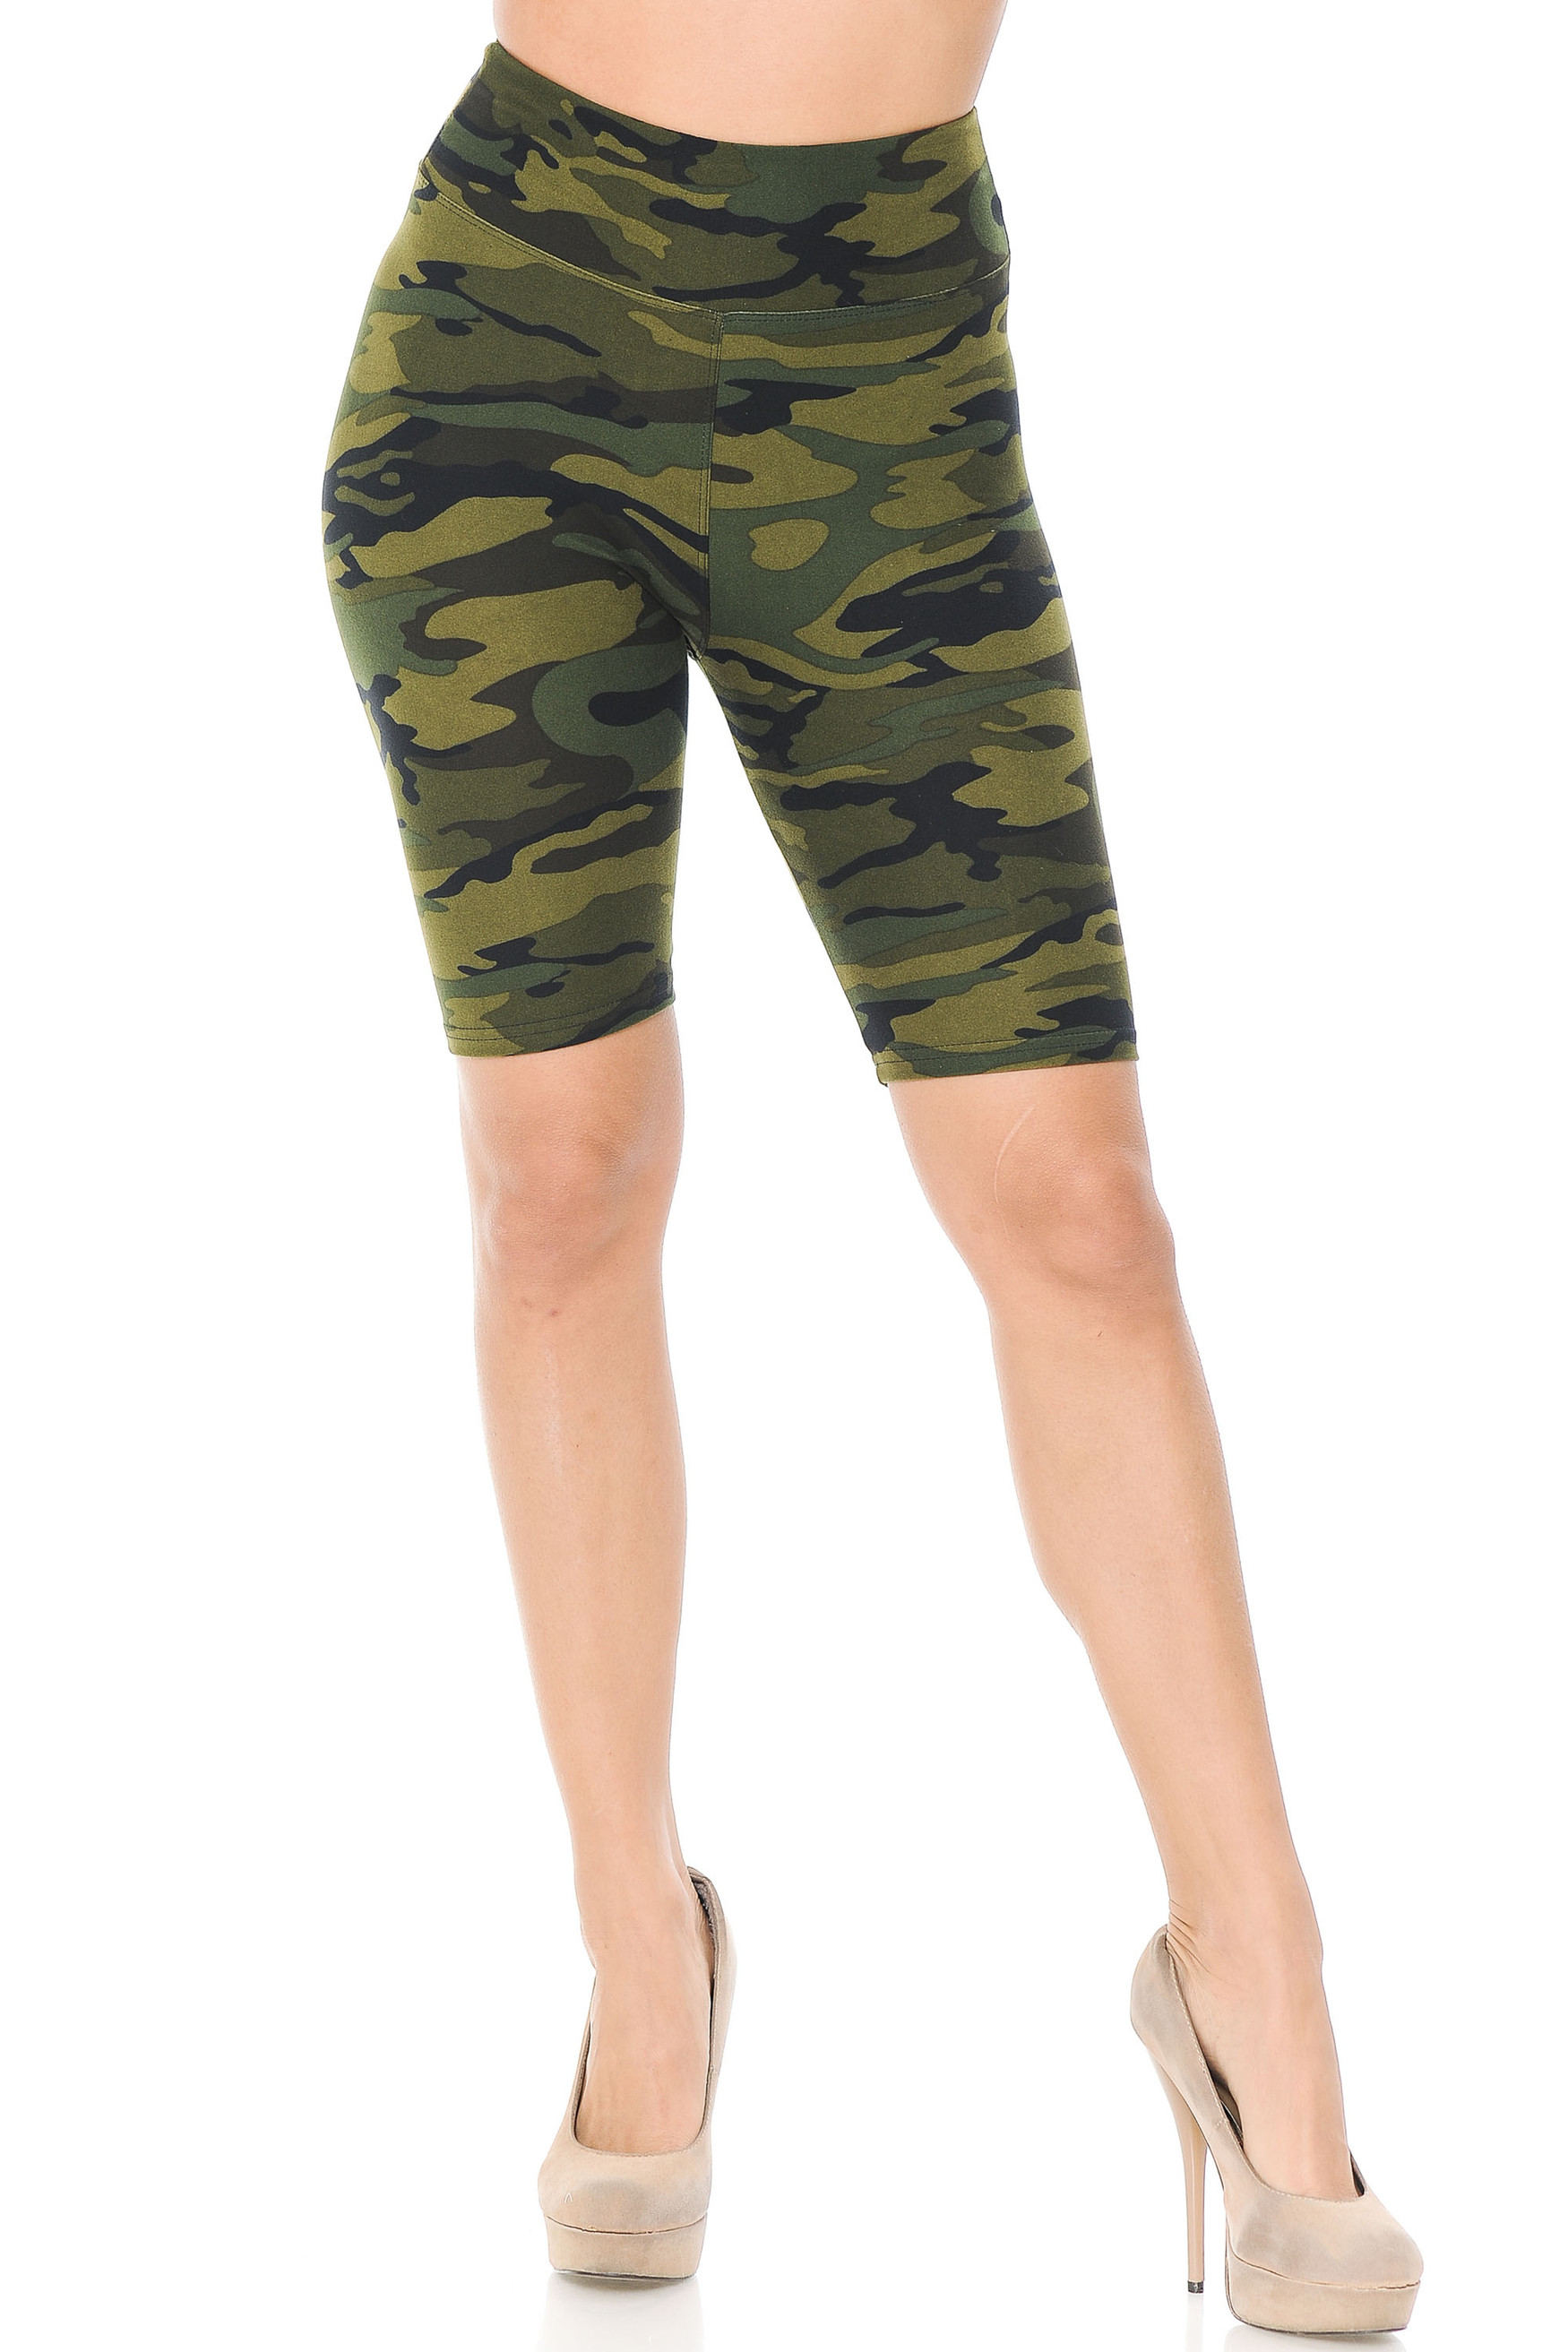 Brushed  Green Camouflage Shorts - 3 Inch Waist Band